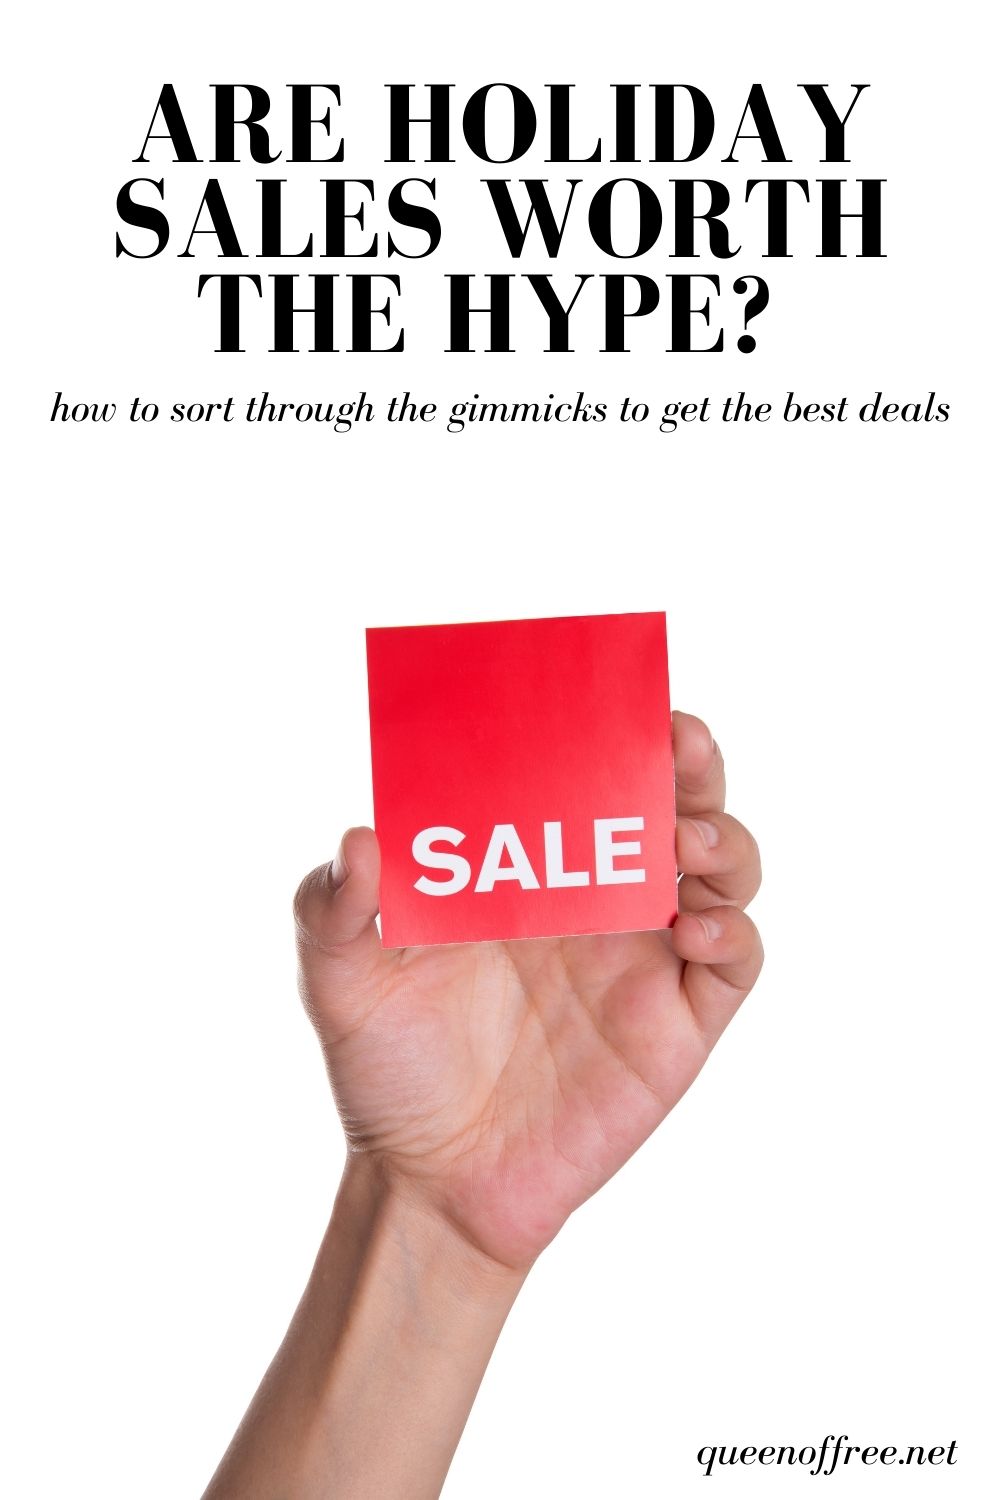 Are Labor Day Sales worth the hype? Check out the Do's and Don't's of shopping holiday sales so you don't overspend this year.